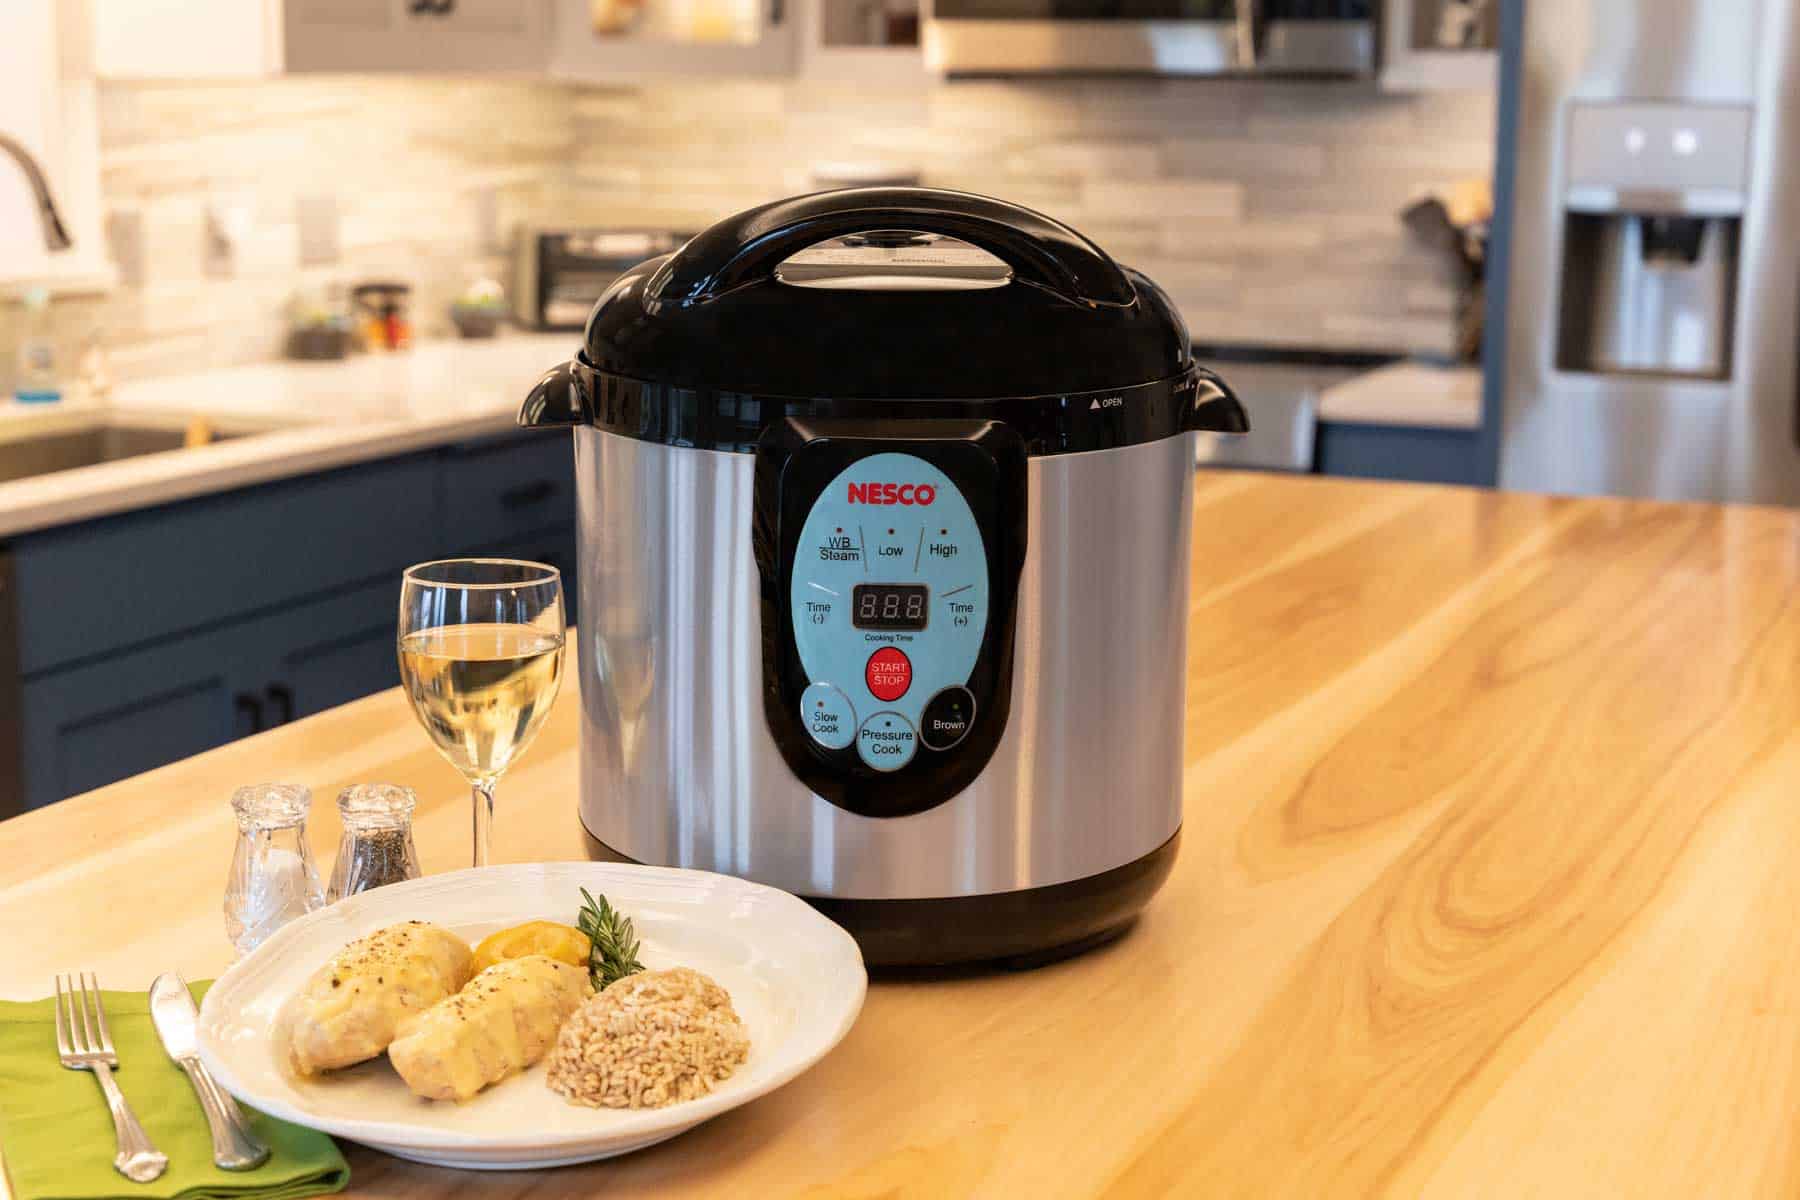 You are currently viewing All-In-One Versatility Makes NESCO Smart Canner & Cooker the Ultimate Kitchen Appliance